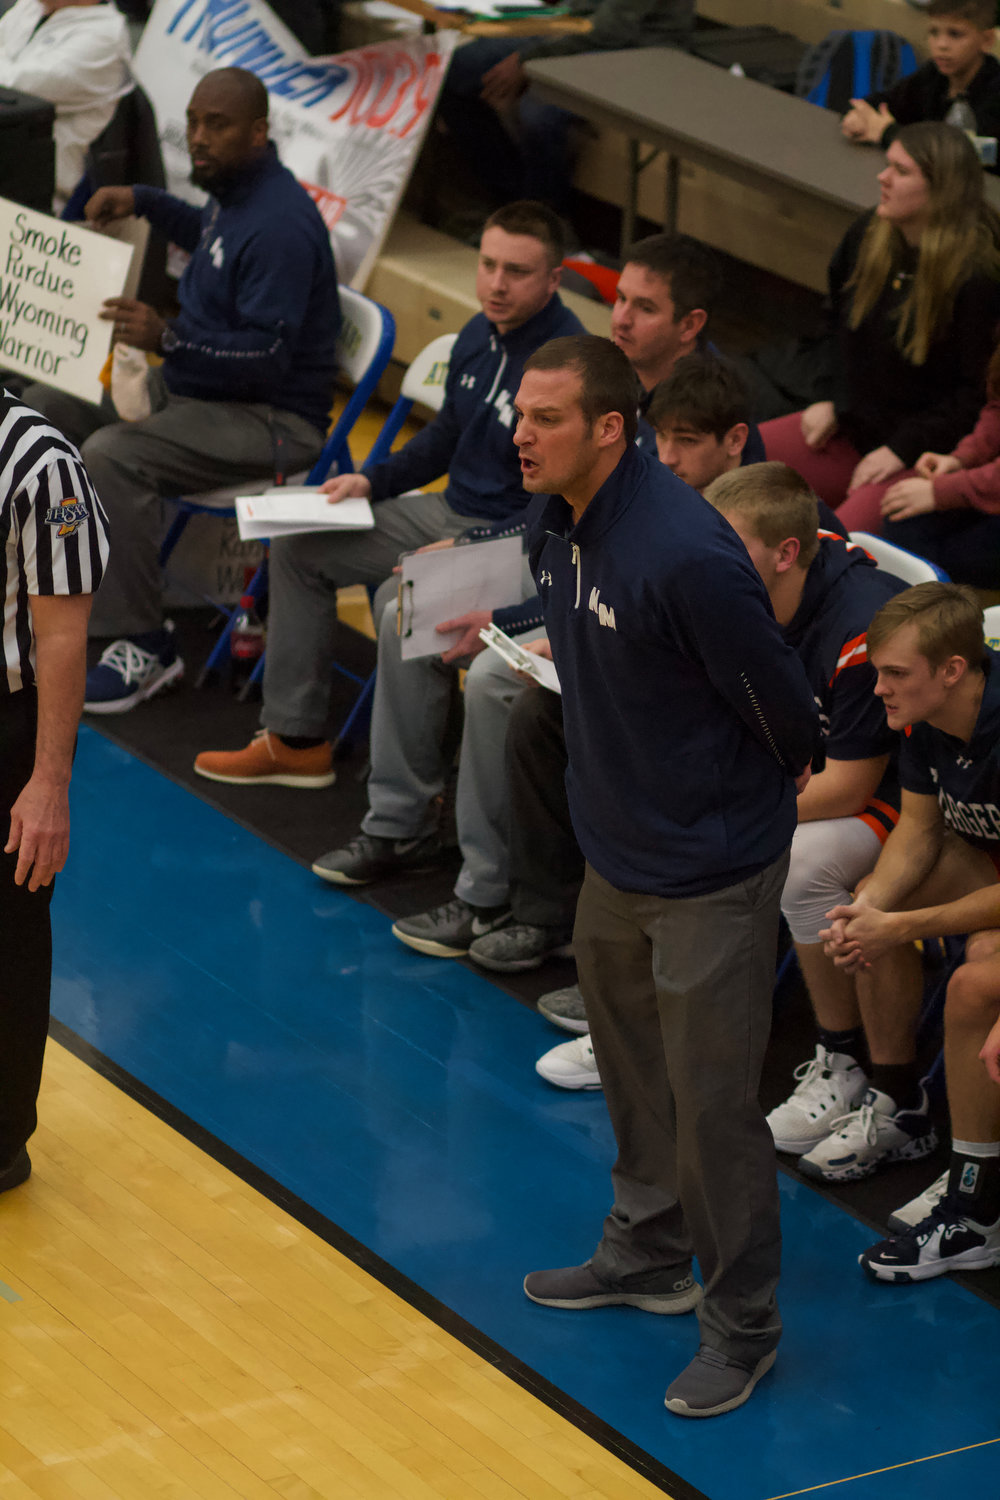 Charger coach Chad Arnold received praise from Pierce for how hard the Chargers played.